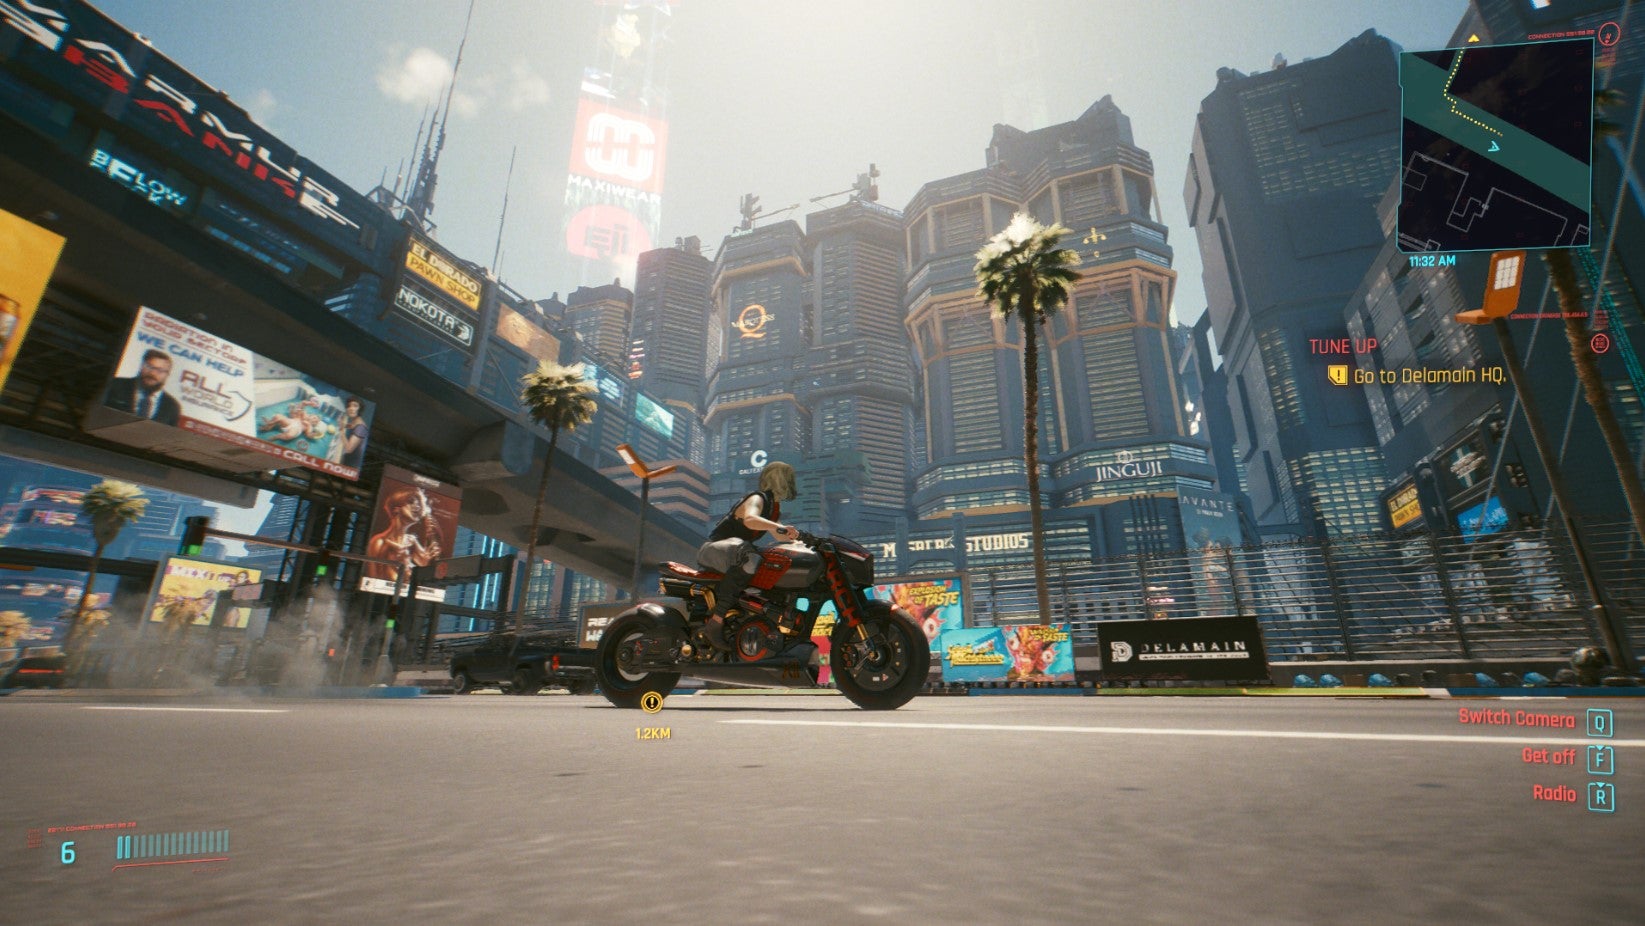 Image for Cyberpunk 2077 on PS4 and Xbox One has severe frame rate issues